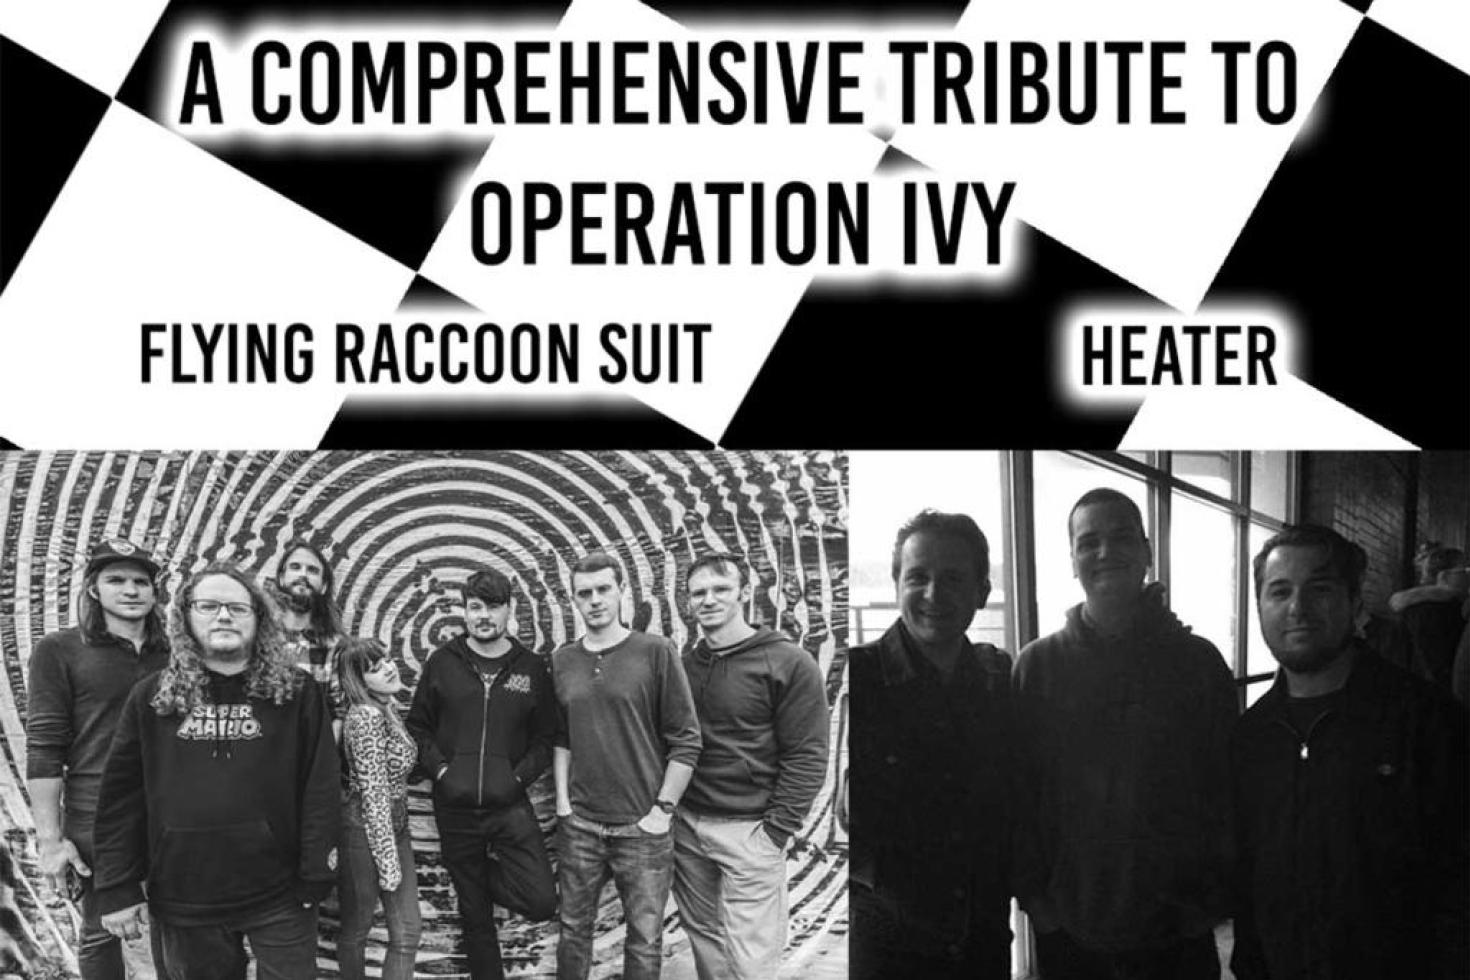 PREMIERE: Heater and Flying Raccoon Suit share Op Ivy covers off upcoming tribute album